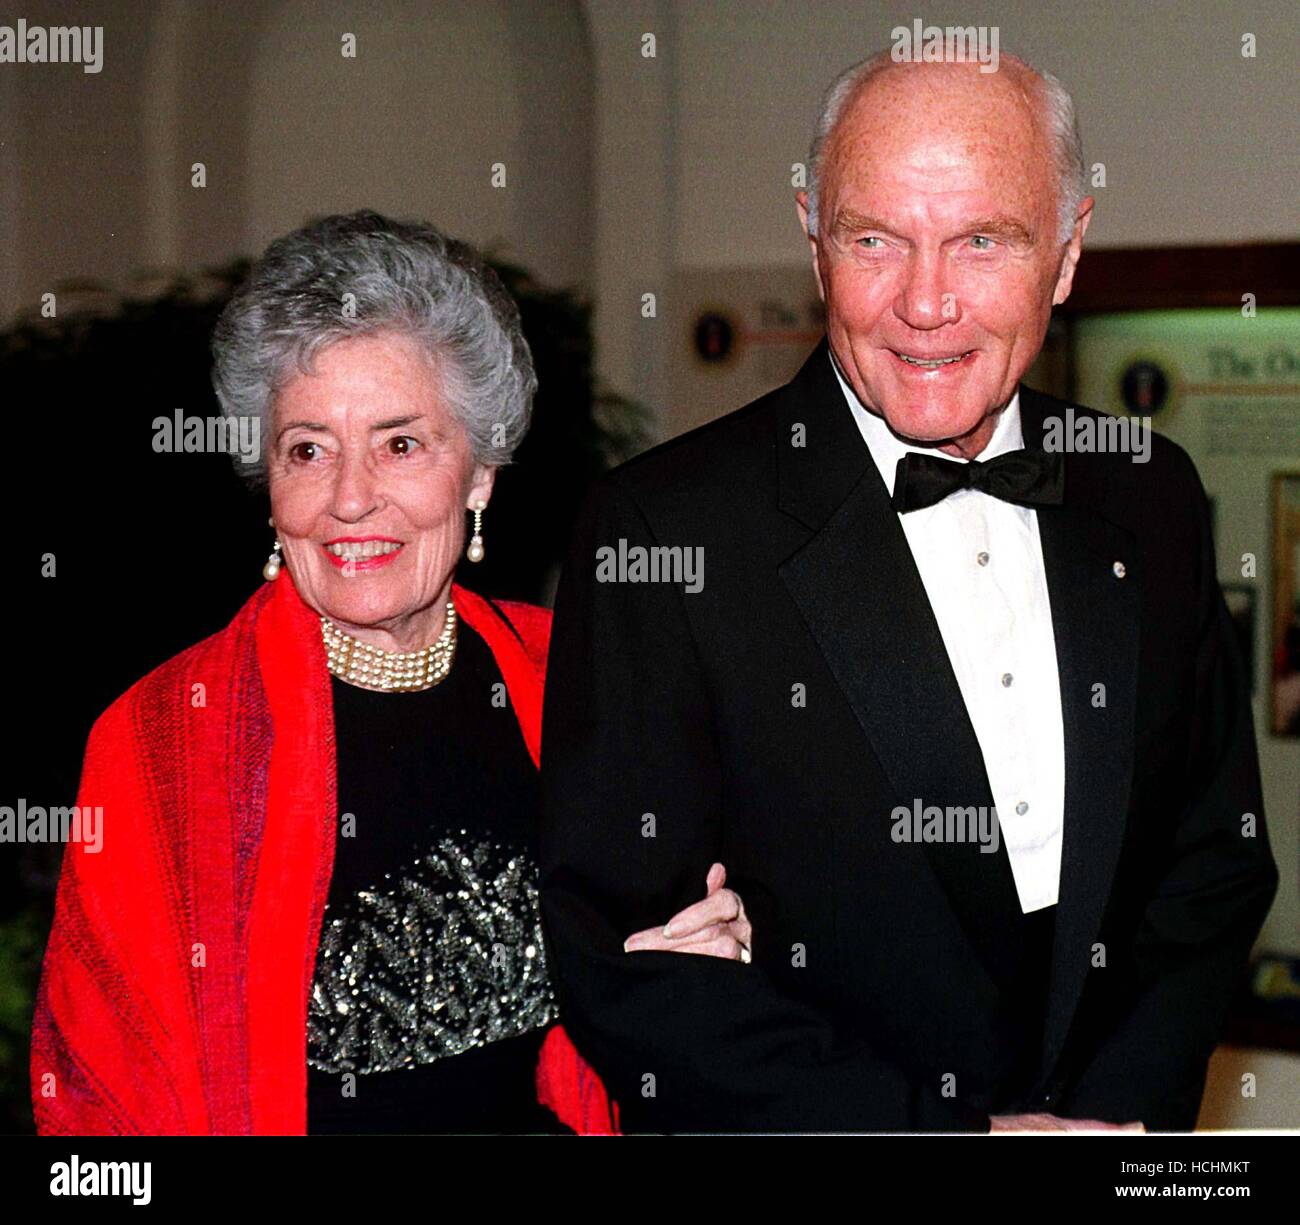 United States Senator John H. Glenn (Democrat of Ohio) and his wife, Annie, arrive at The White House for the State Dinner honoring President Jiang Zemin of China at the White House in Washington, DC on October 29, 1997.Credit: Ron Sachs/CNP. /MediaPunch Stock Photo